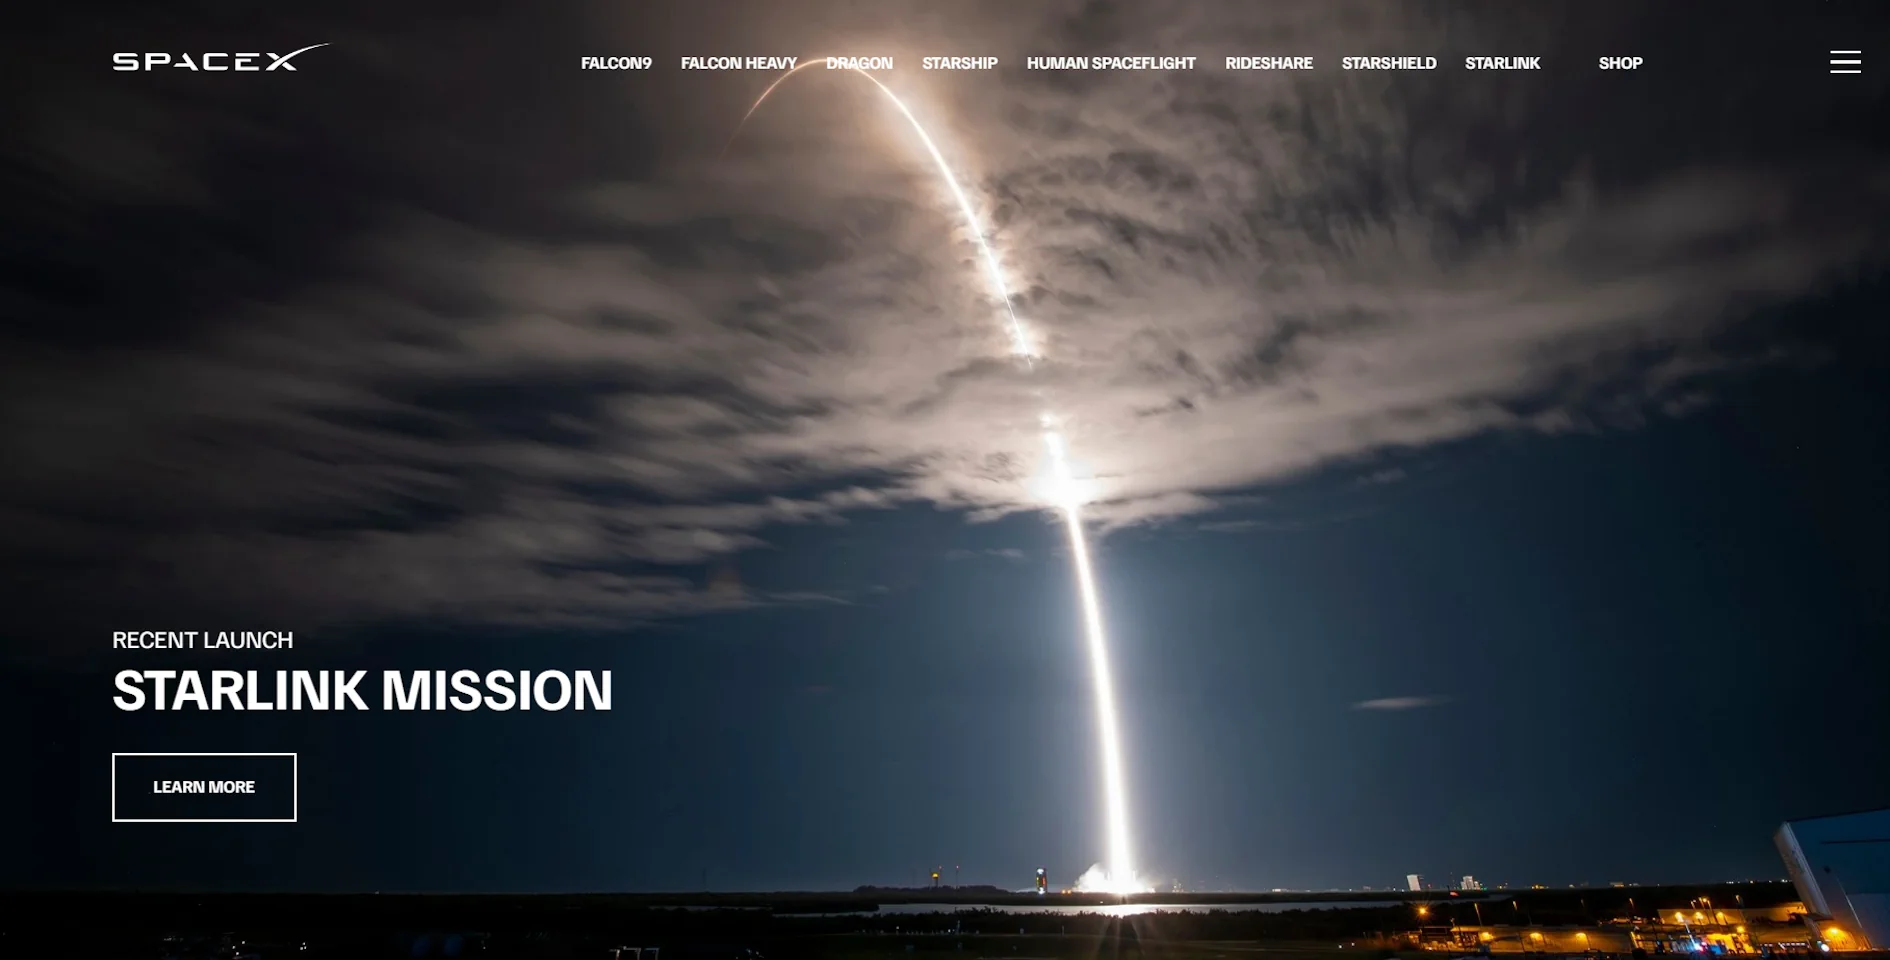 SpaceX Website Demo